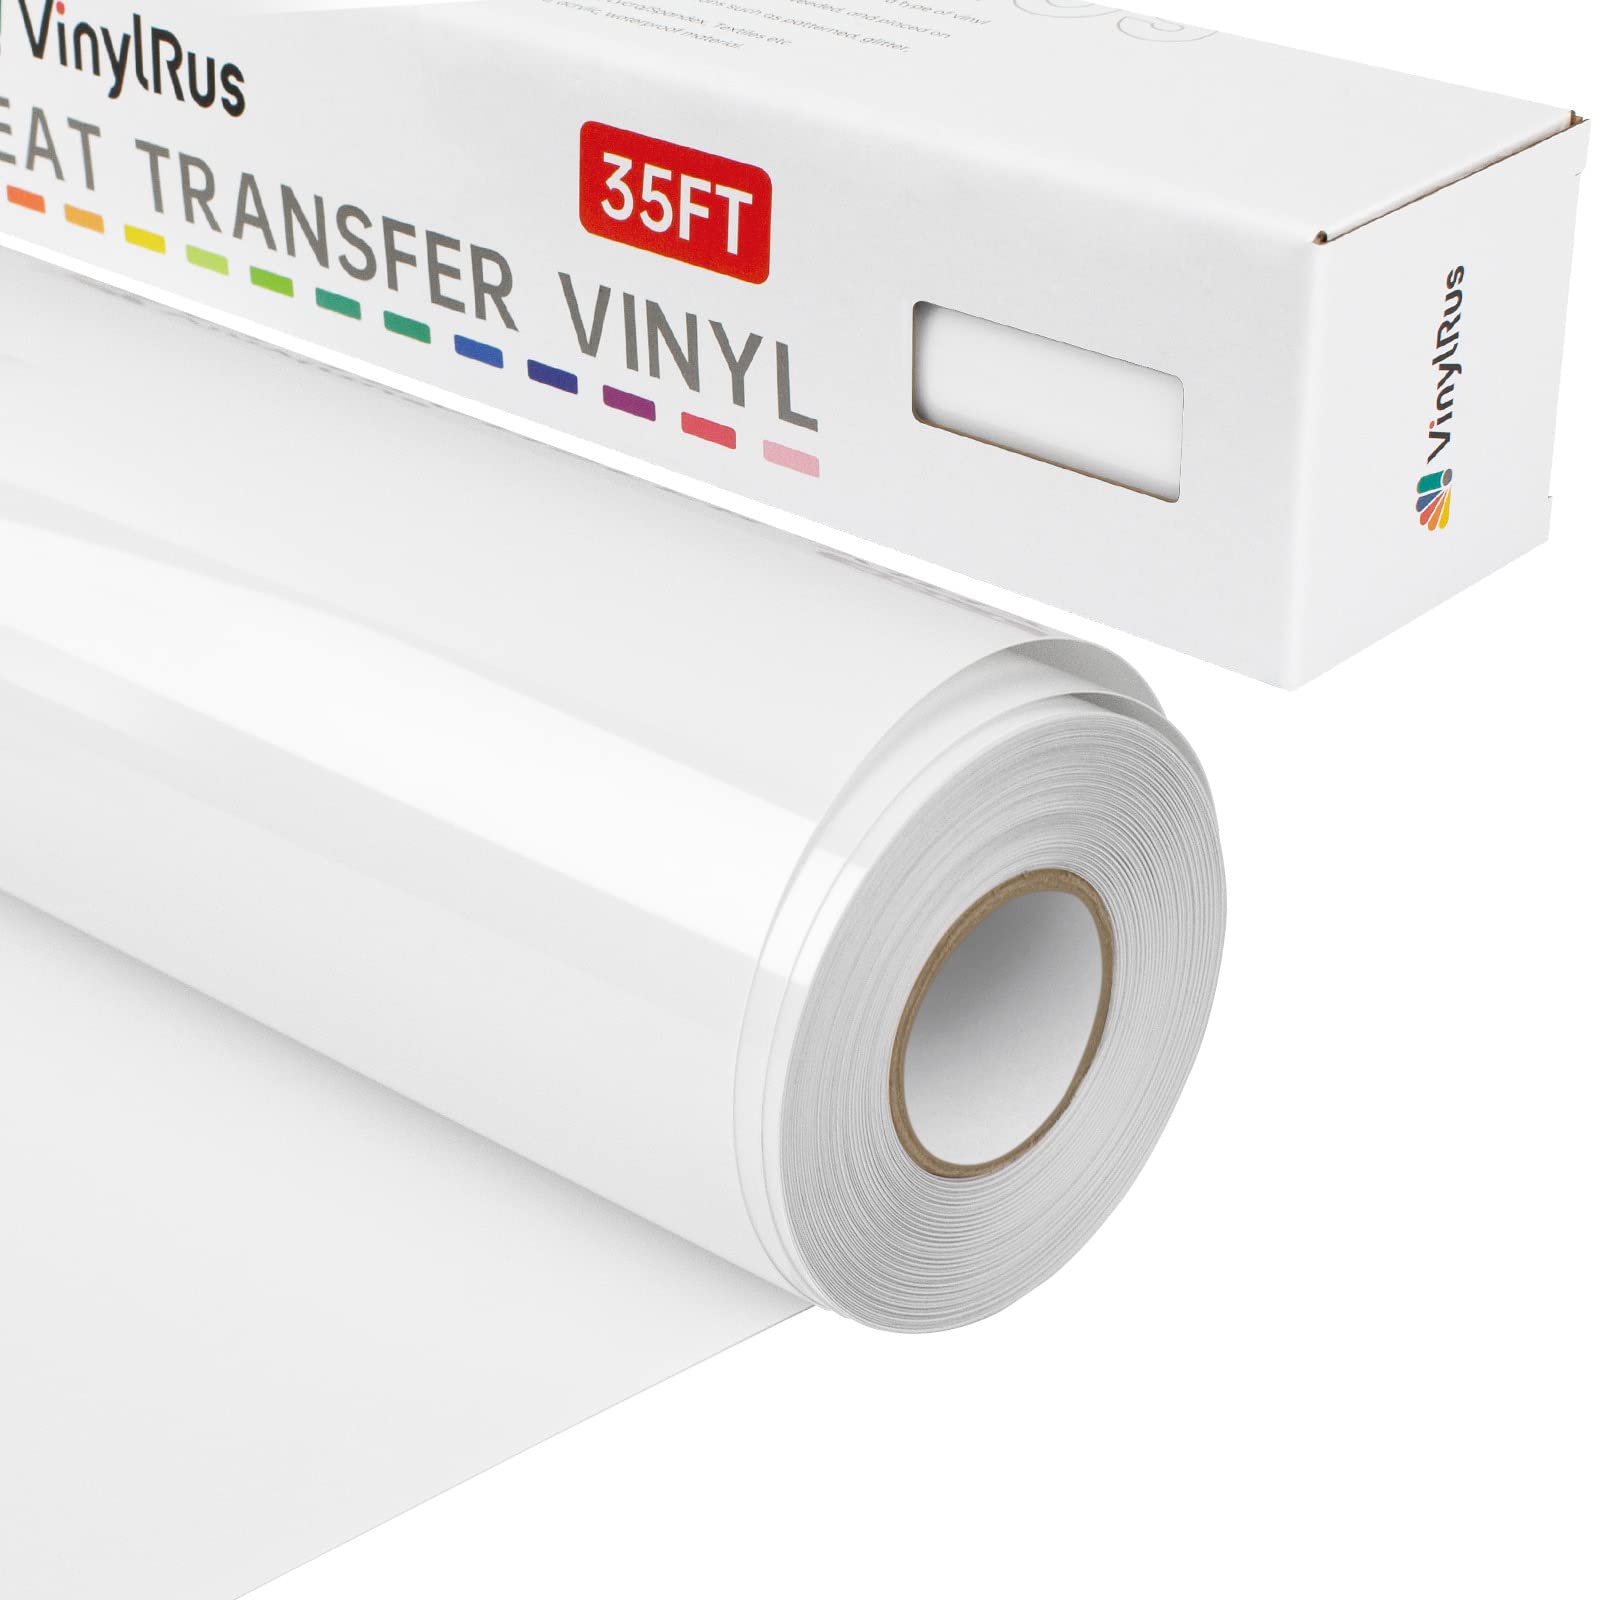 VinylRus Heat Transfer Vinyl-12” x 25ft Red Iron on Vinyl Roll for Shirts,  HTV Vinyl for Silhouette Cameo, Cricut, Easy to Cut & Weed